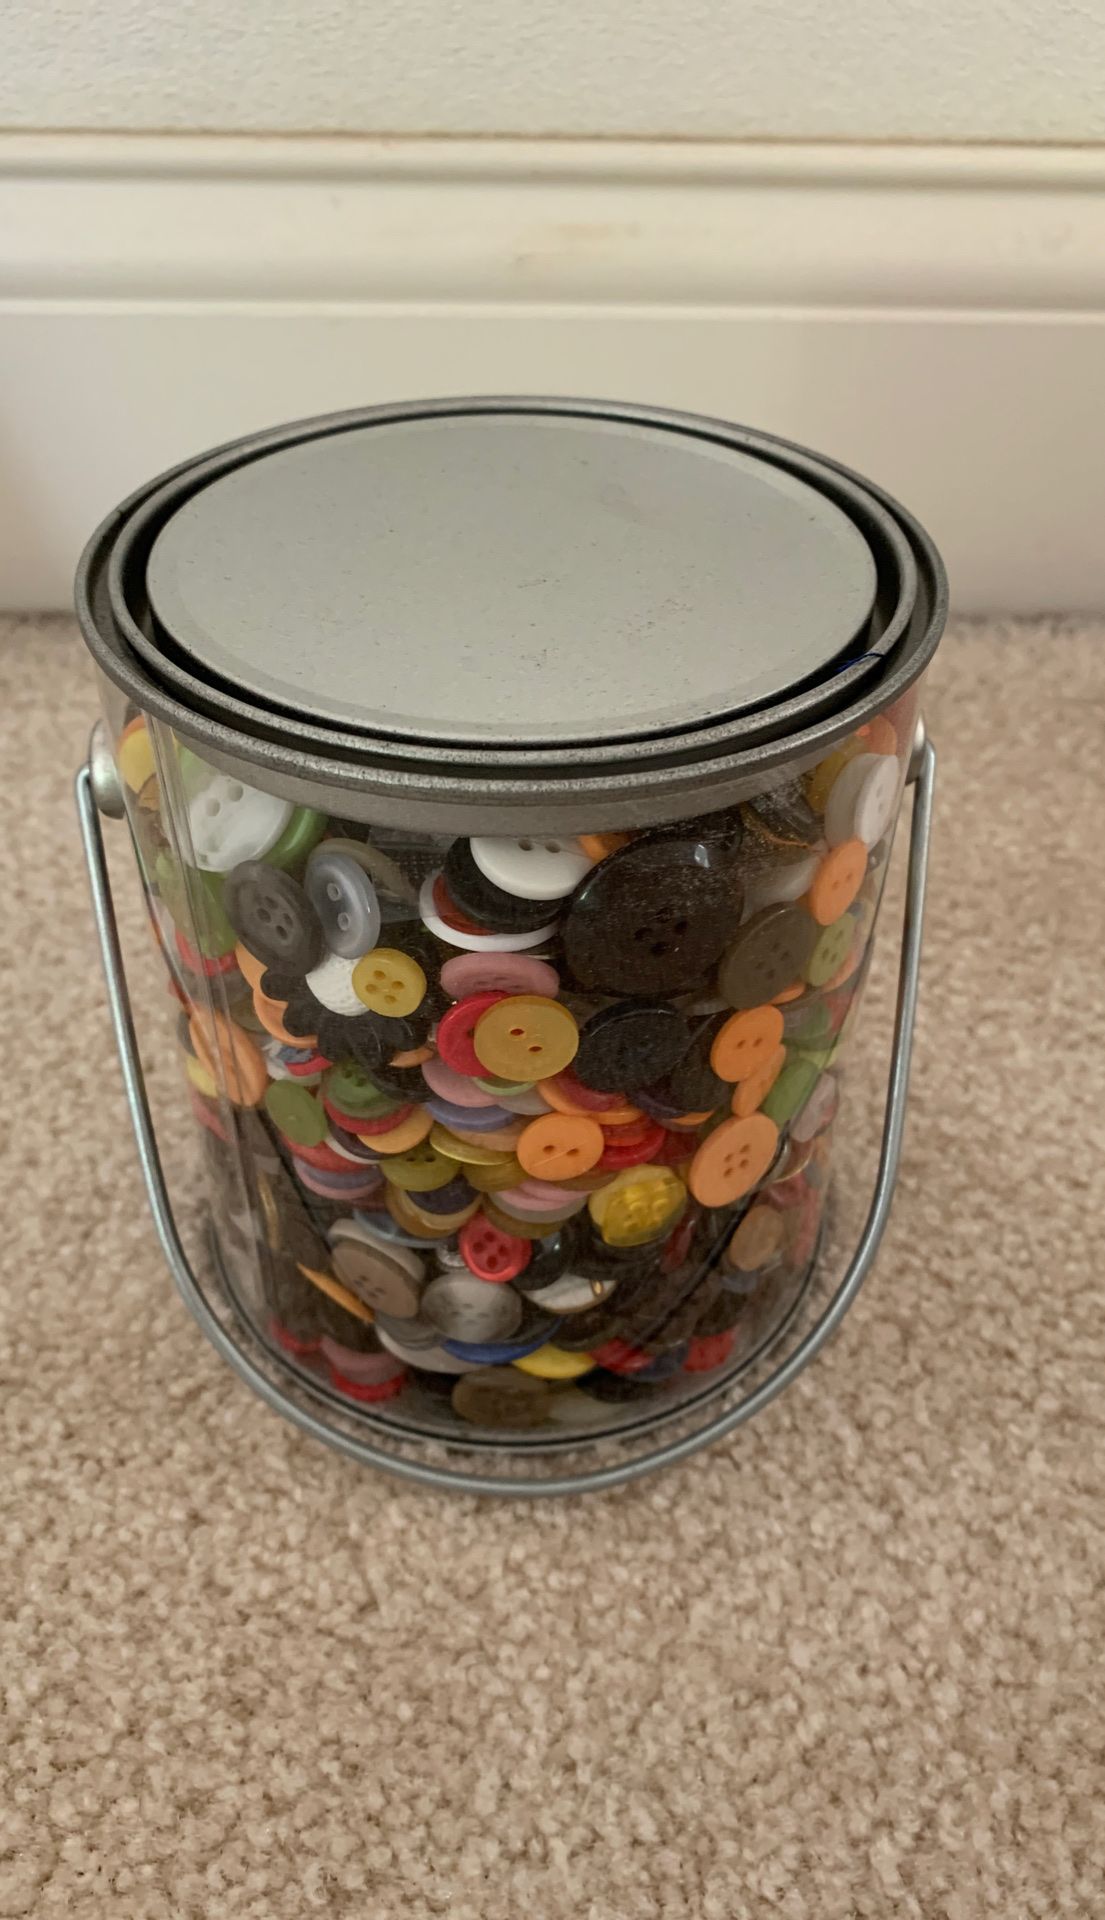 Pail full of buttons. Brand new